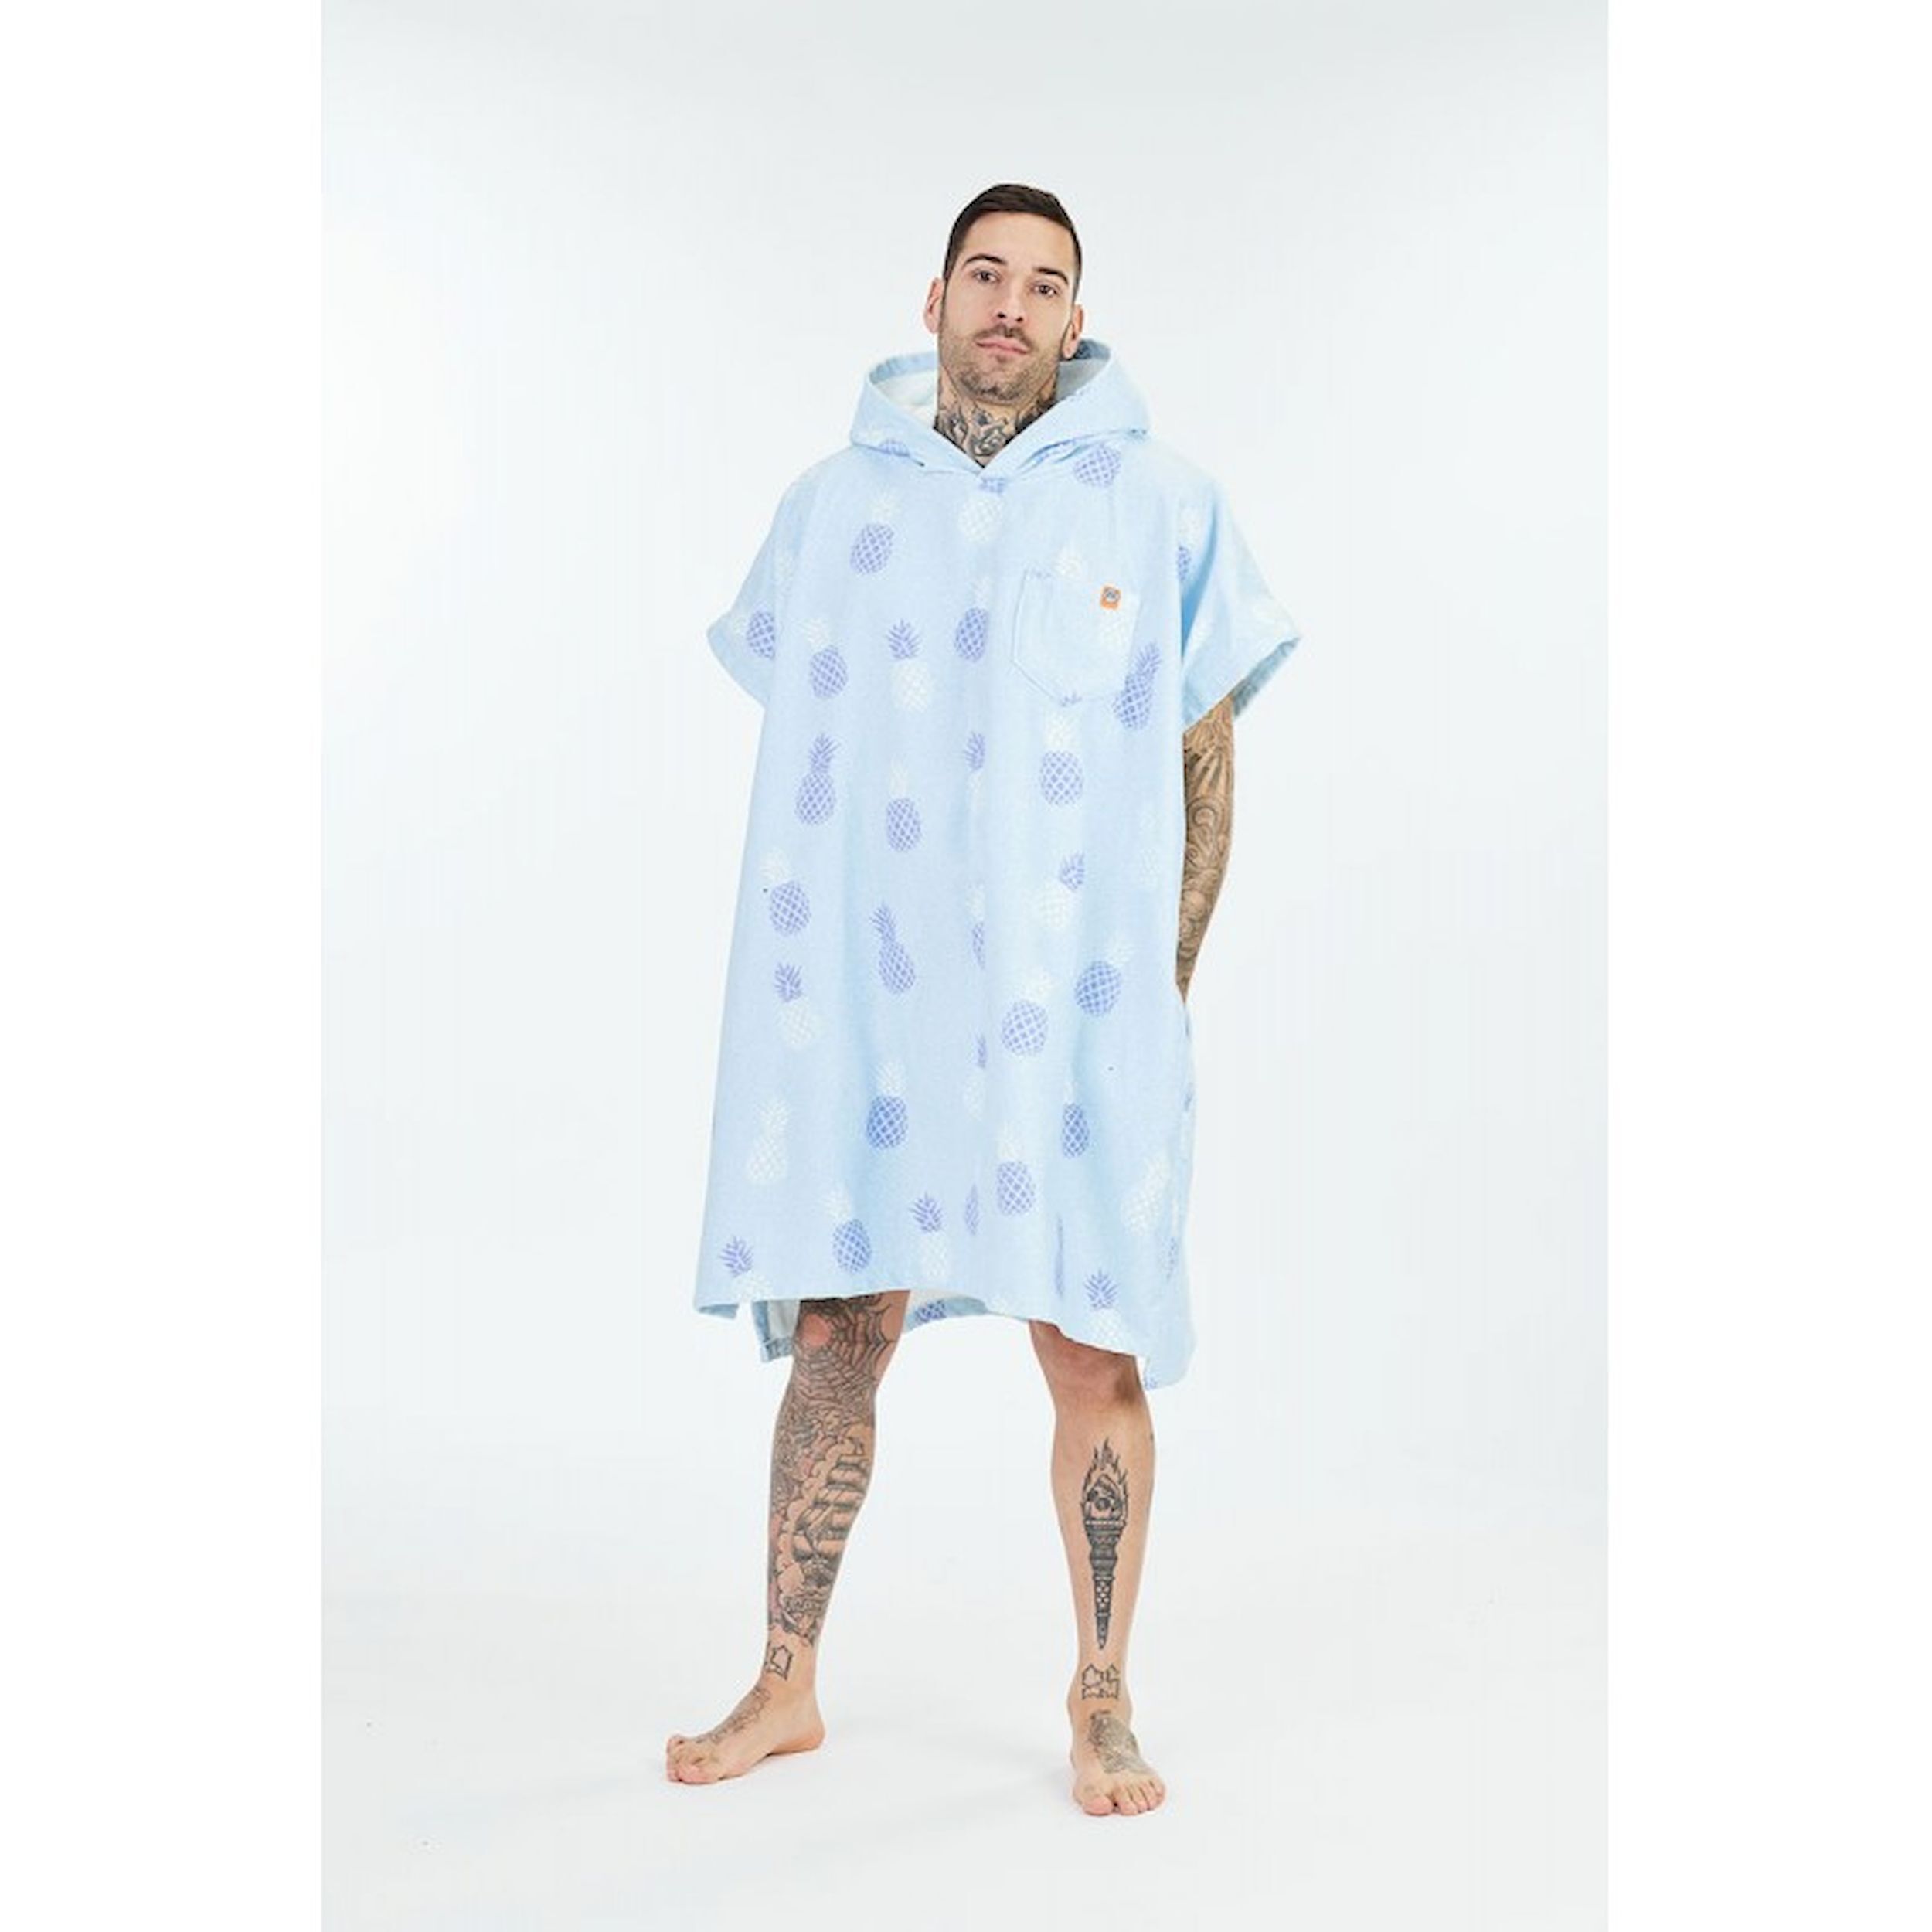 After Essentials Poncho Pineapple - Regenponcho